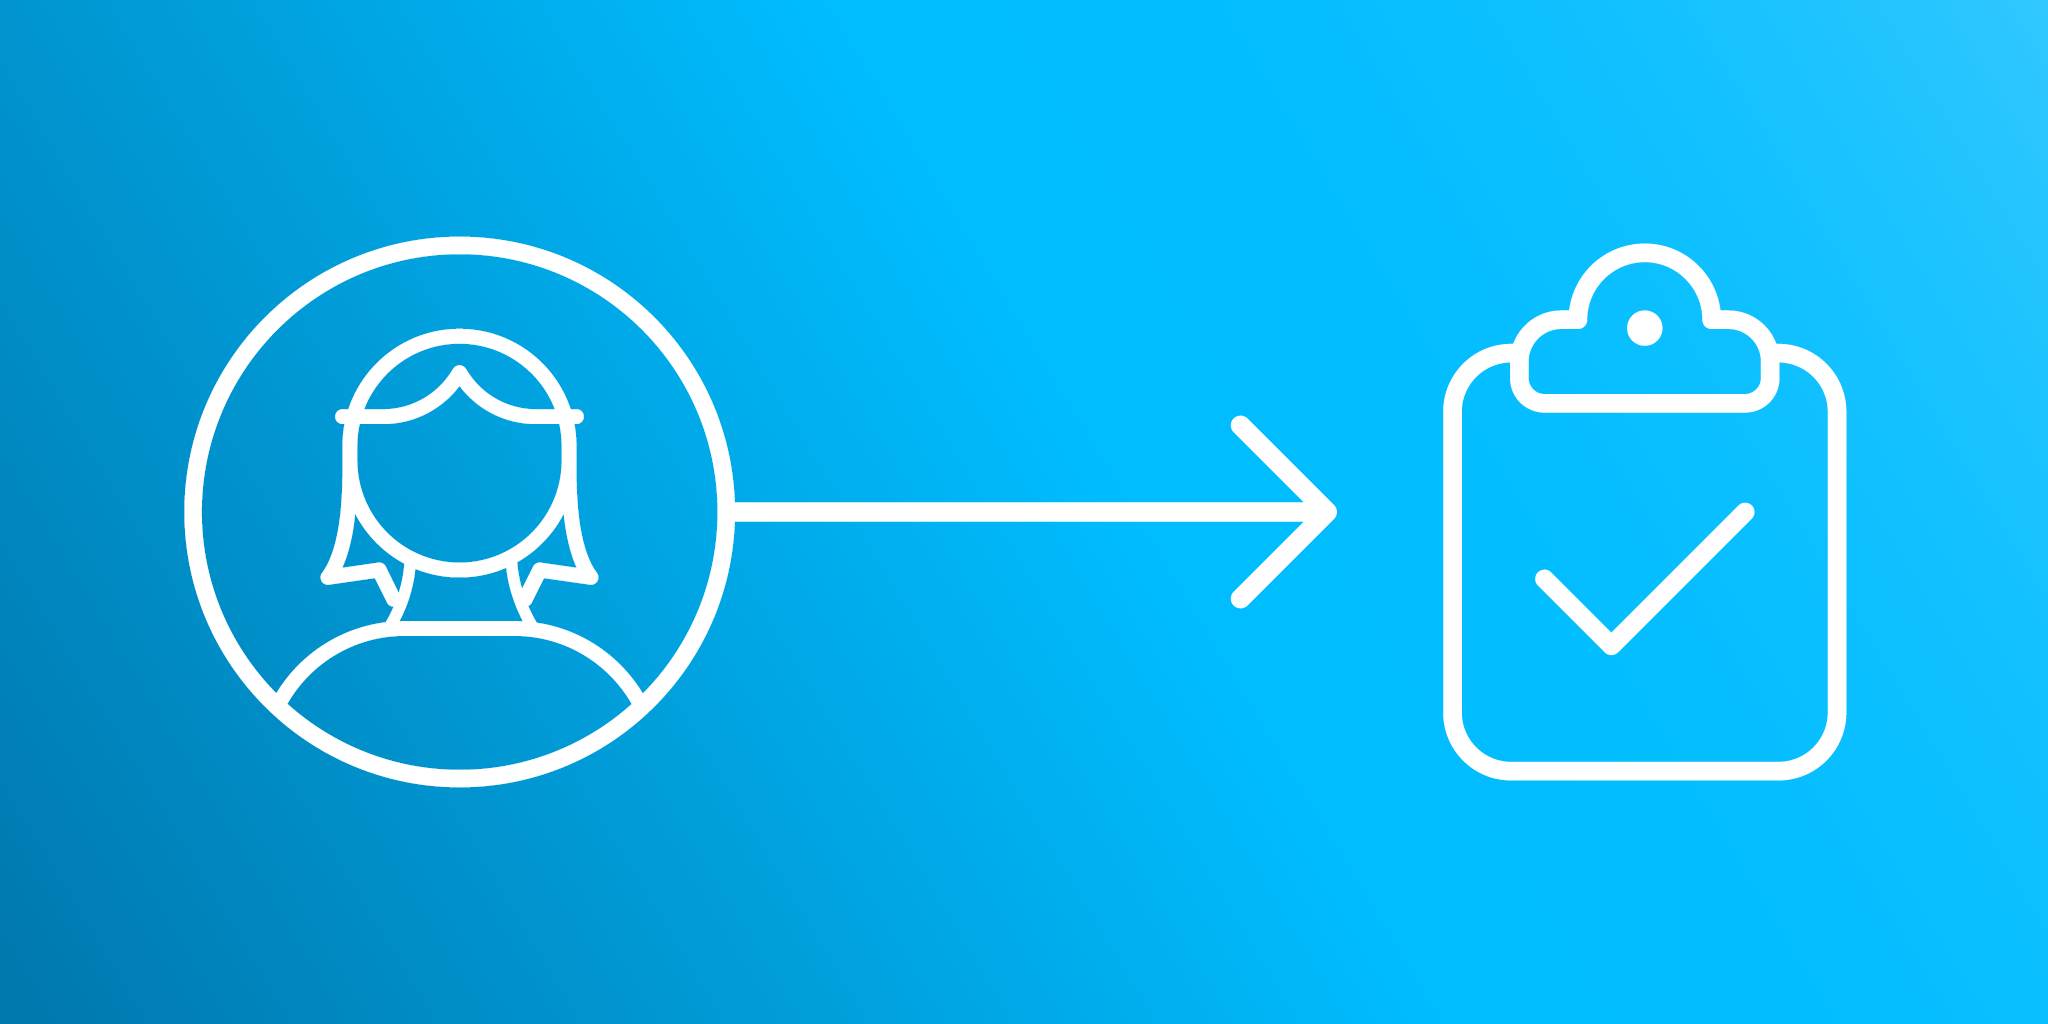 Blue image with icons illustrating developing a good candidate experience during the hiring process